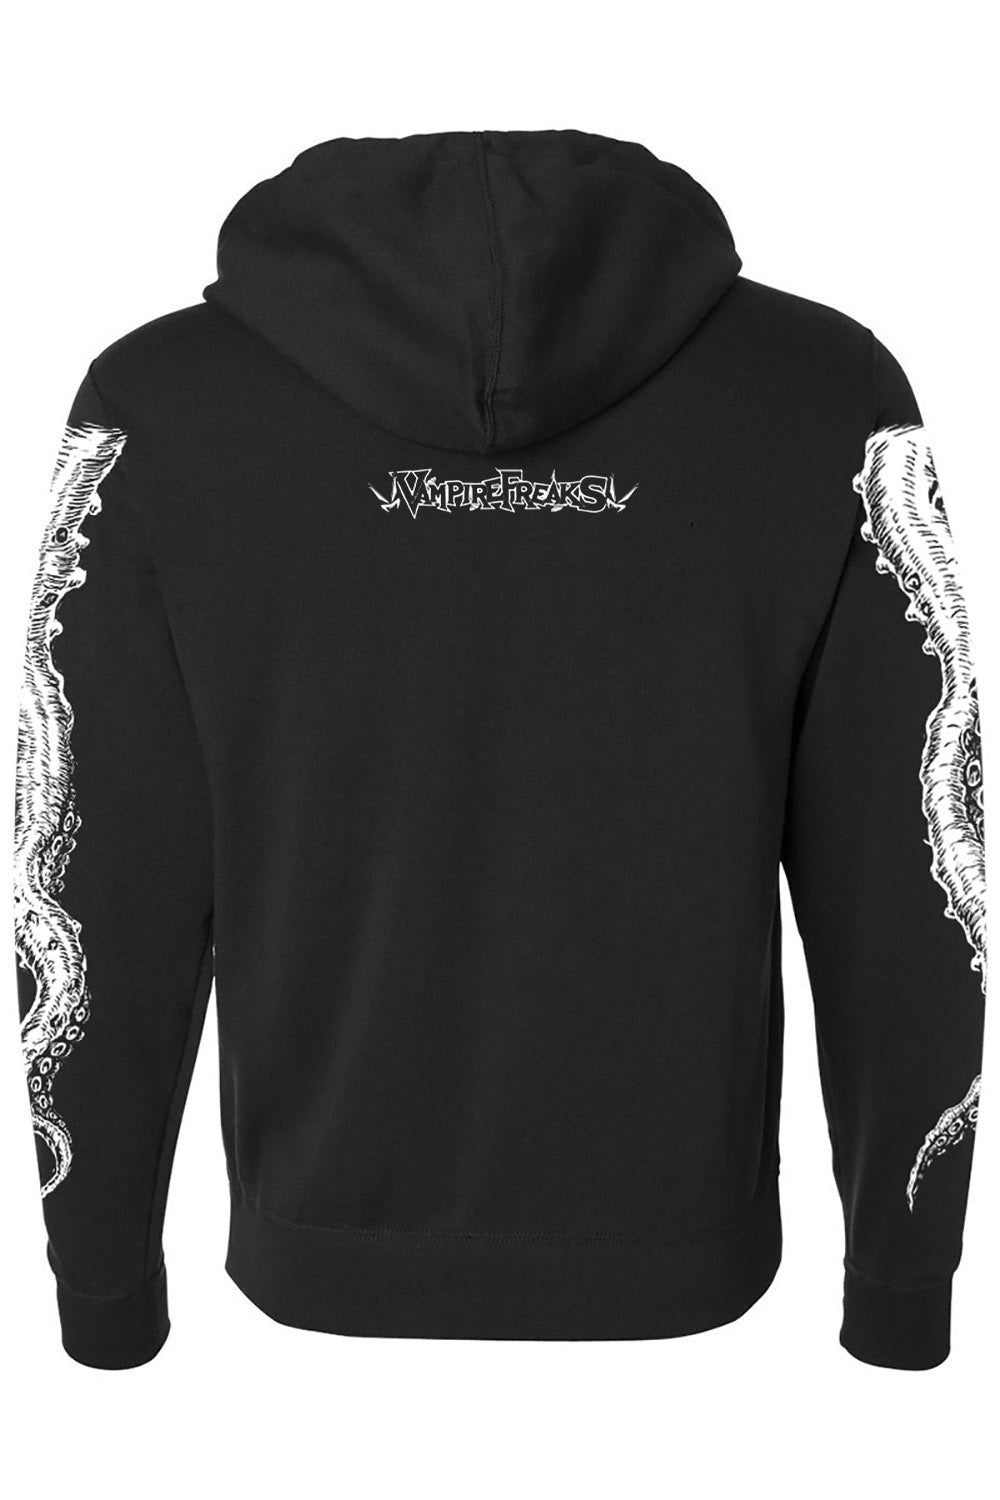 plus size gothic horror hoodie for men